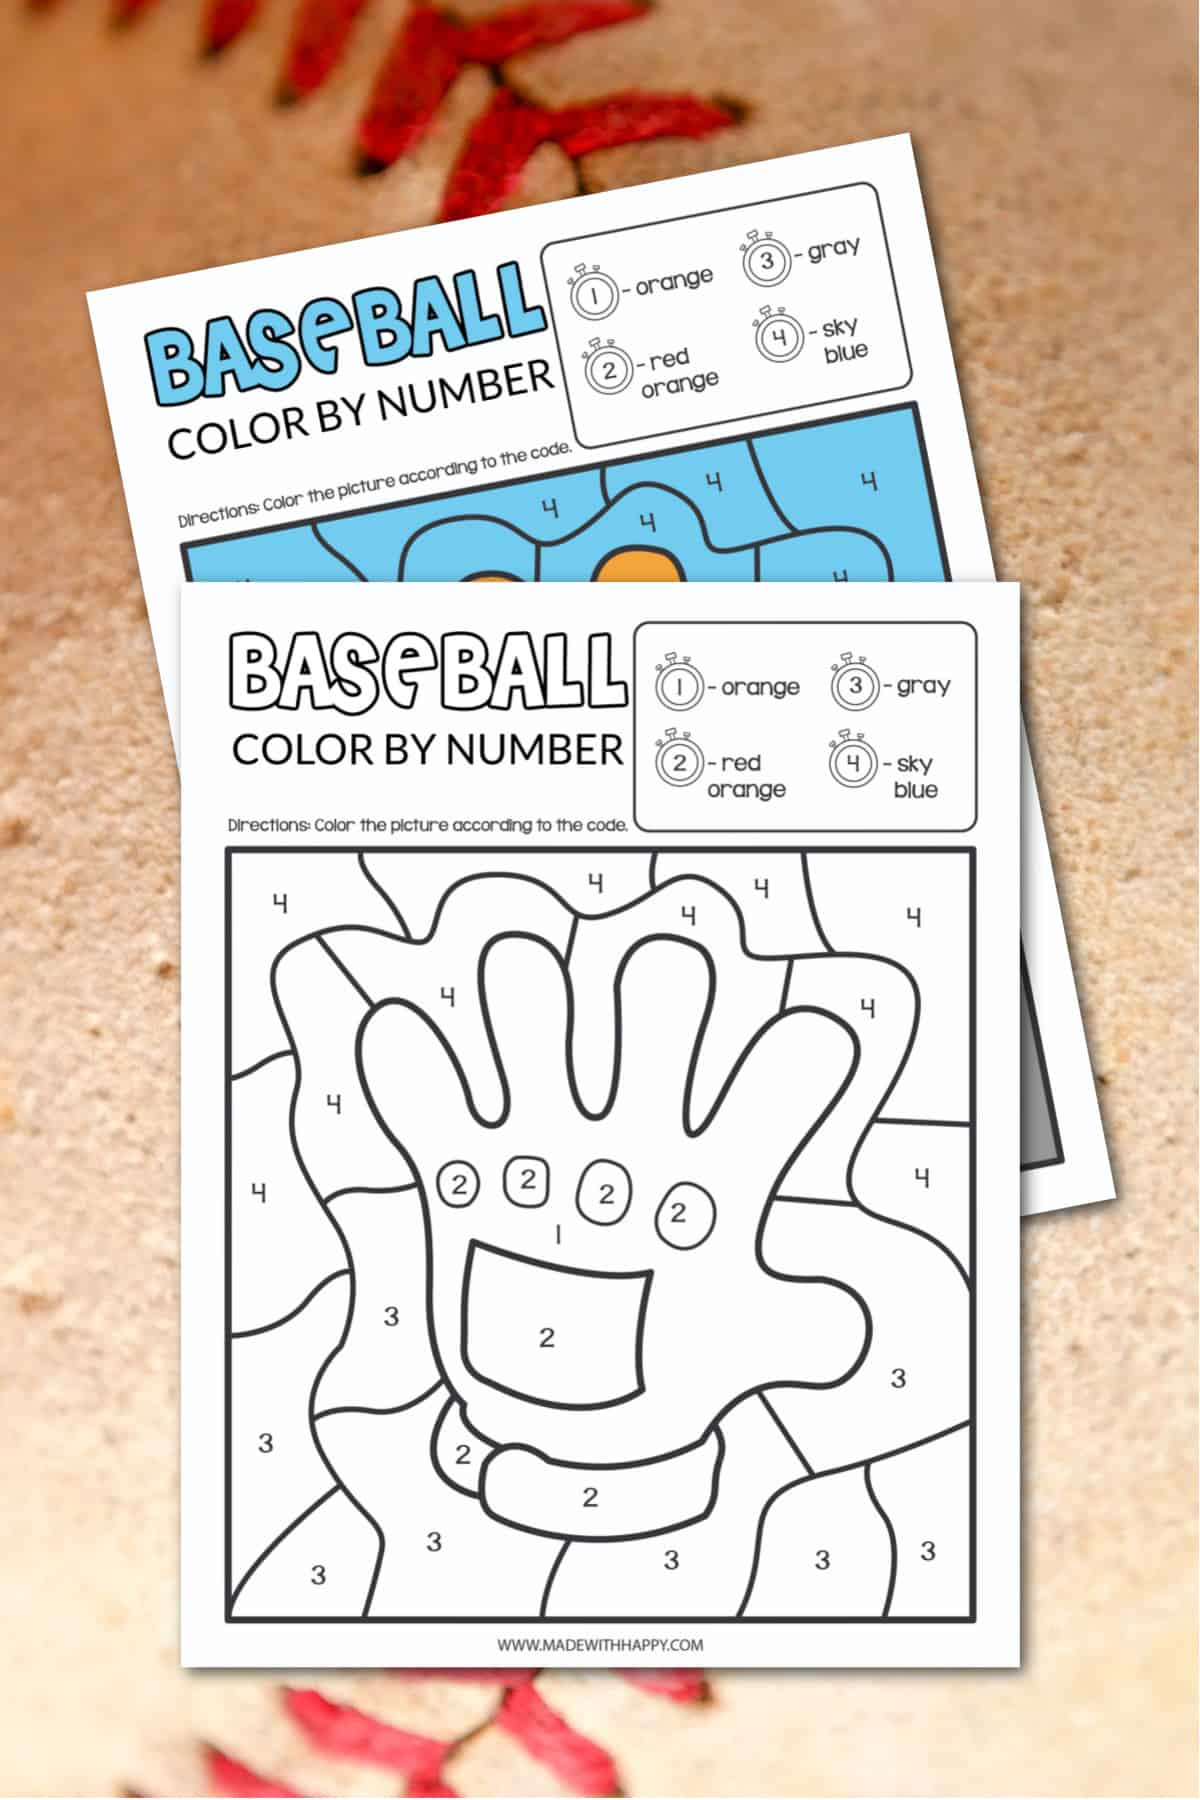 color by number baseball